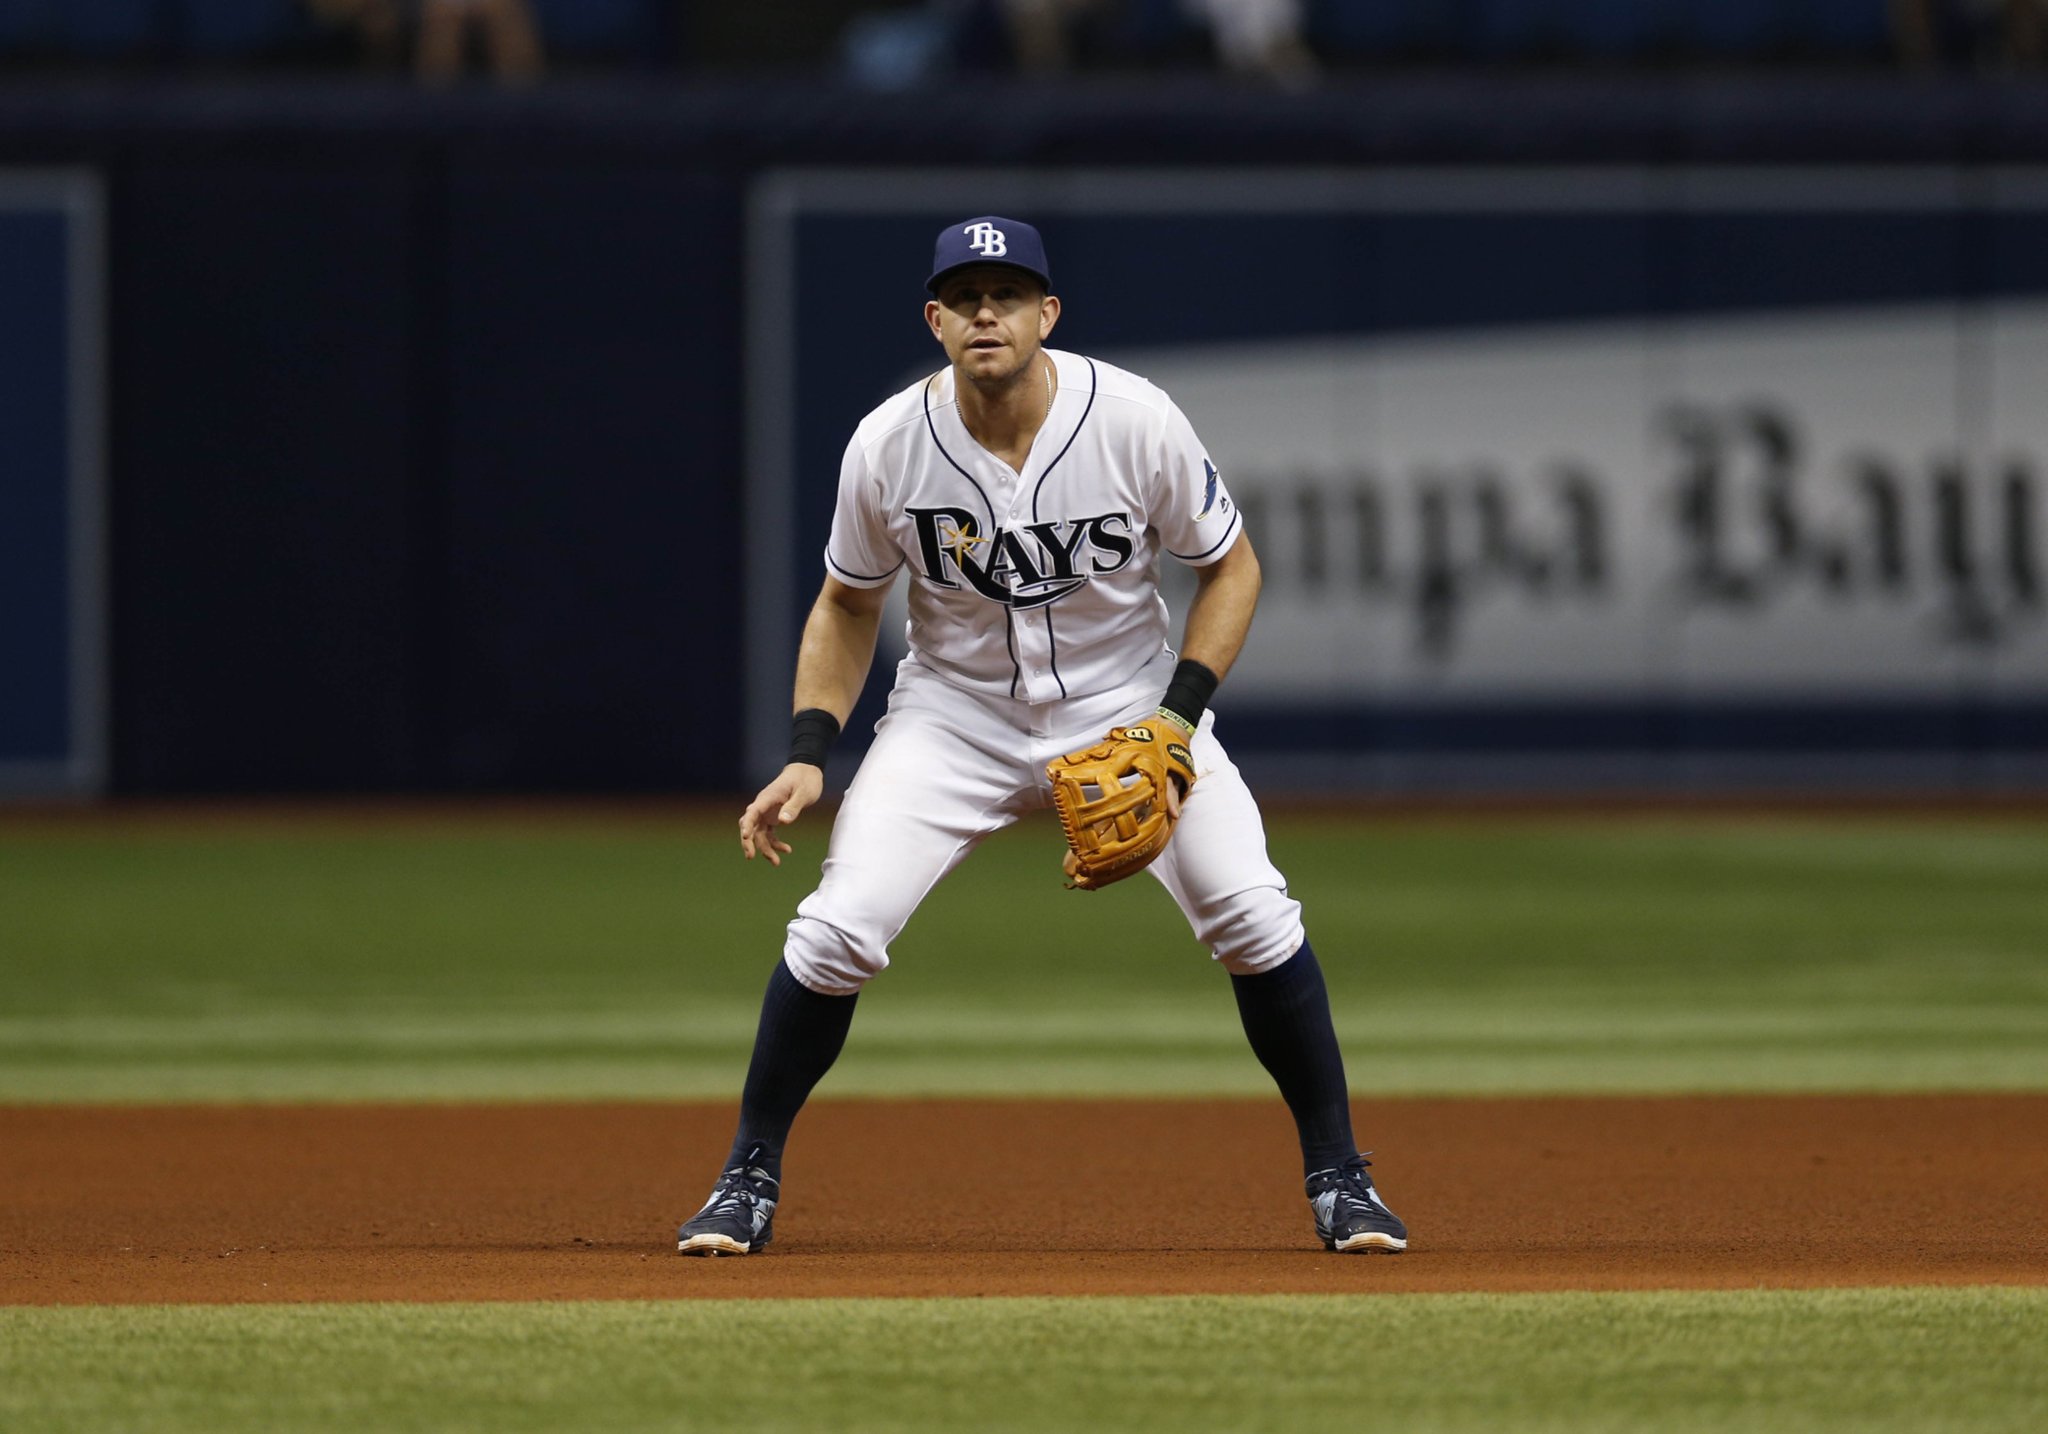 On Wednesday, Evan Longoria became the Rays leader with 1,236 games played, surpassing Carl Crawford. (Photo Credit: Tampa Bay Rays)